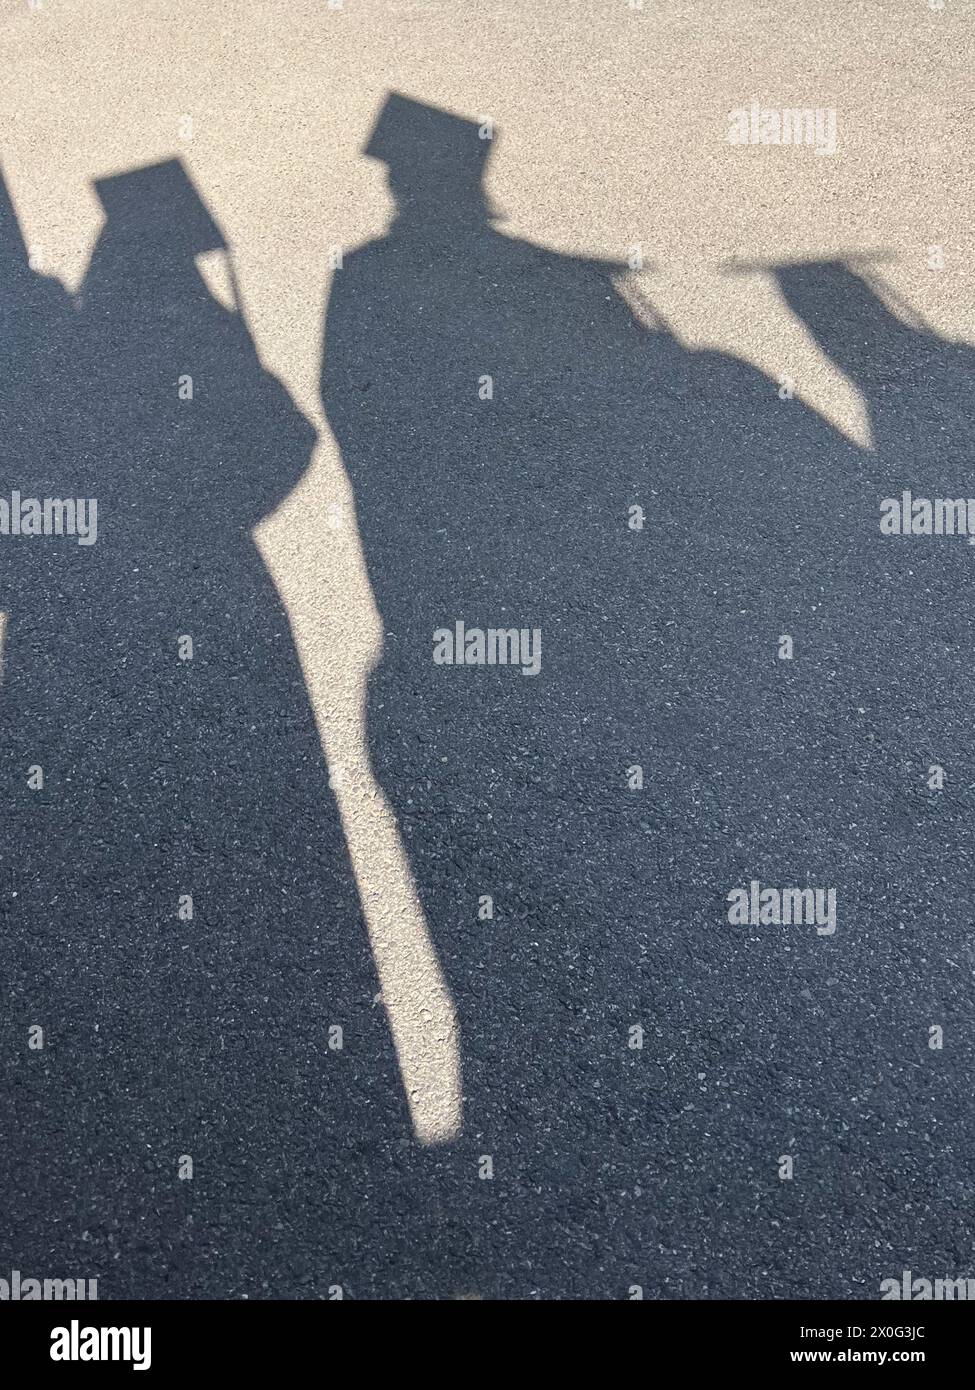 Shadows of graduates in cap and gown on pavement Stock Photo